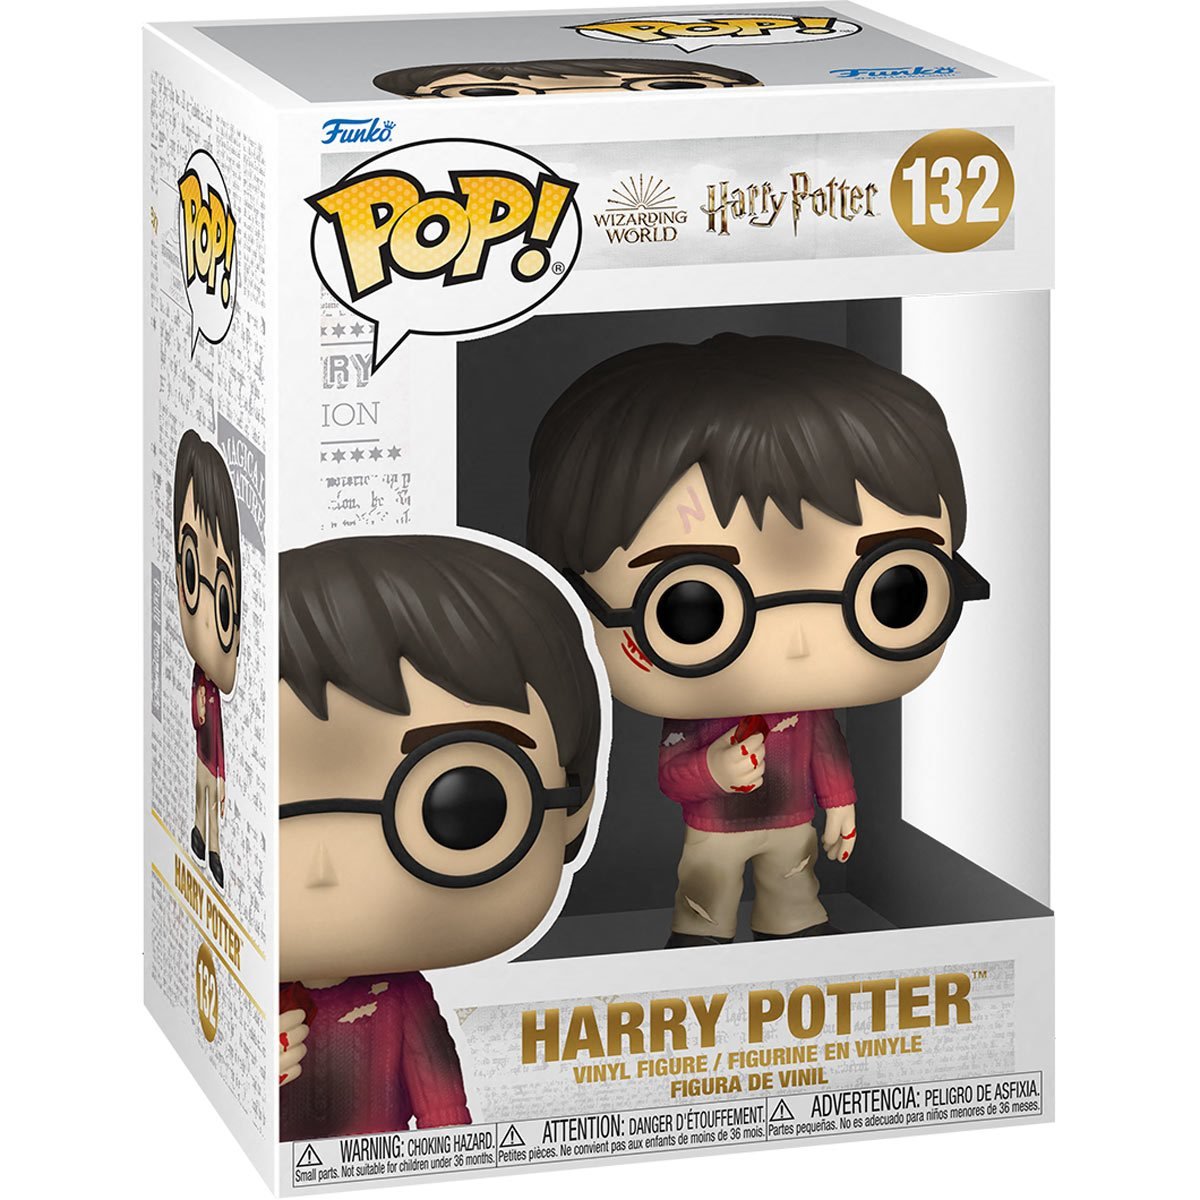 Funko Pop! Harry Potter and the Sorcerer's Stone 20th Anniversary: Harry with the Stone